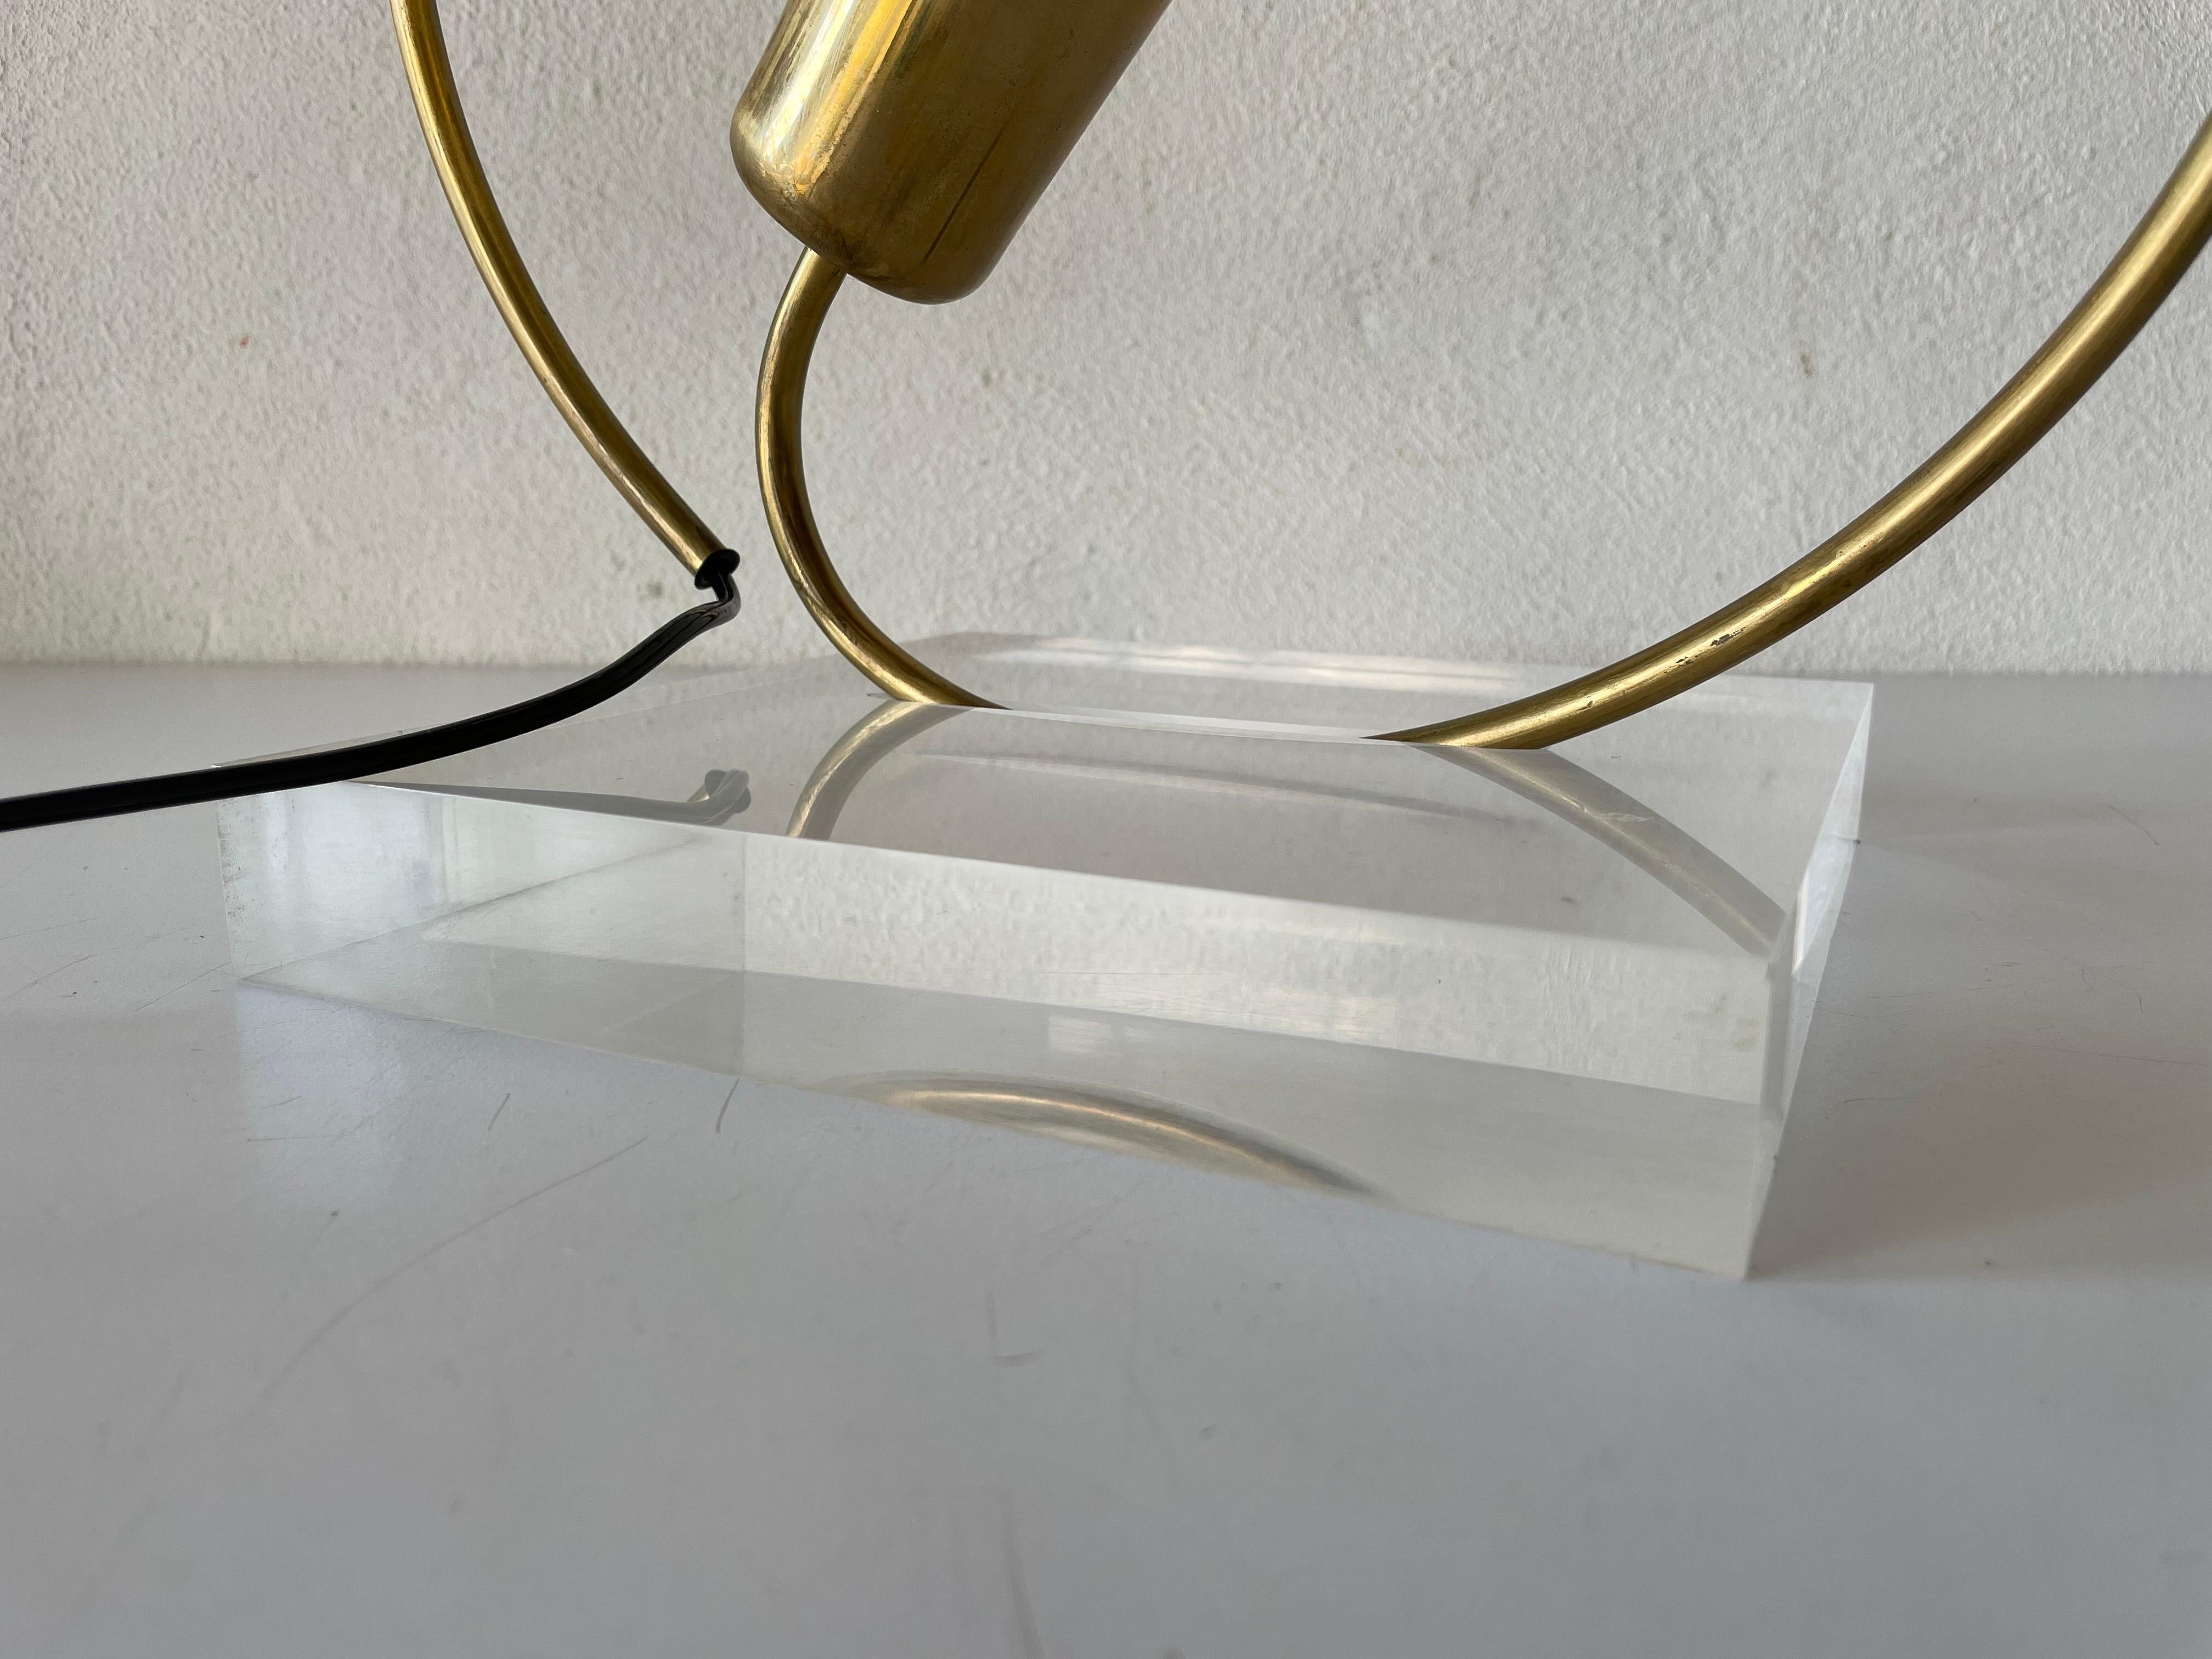 Brass & Lucite Trumpet Design Table Lamp, 1960s, Italy For Sale 3